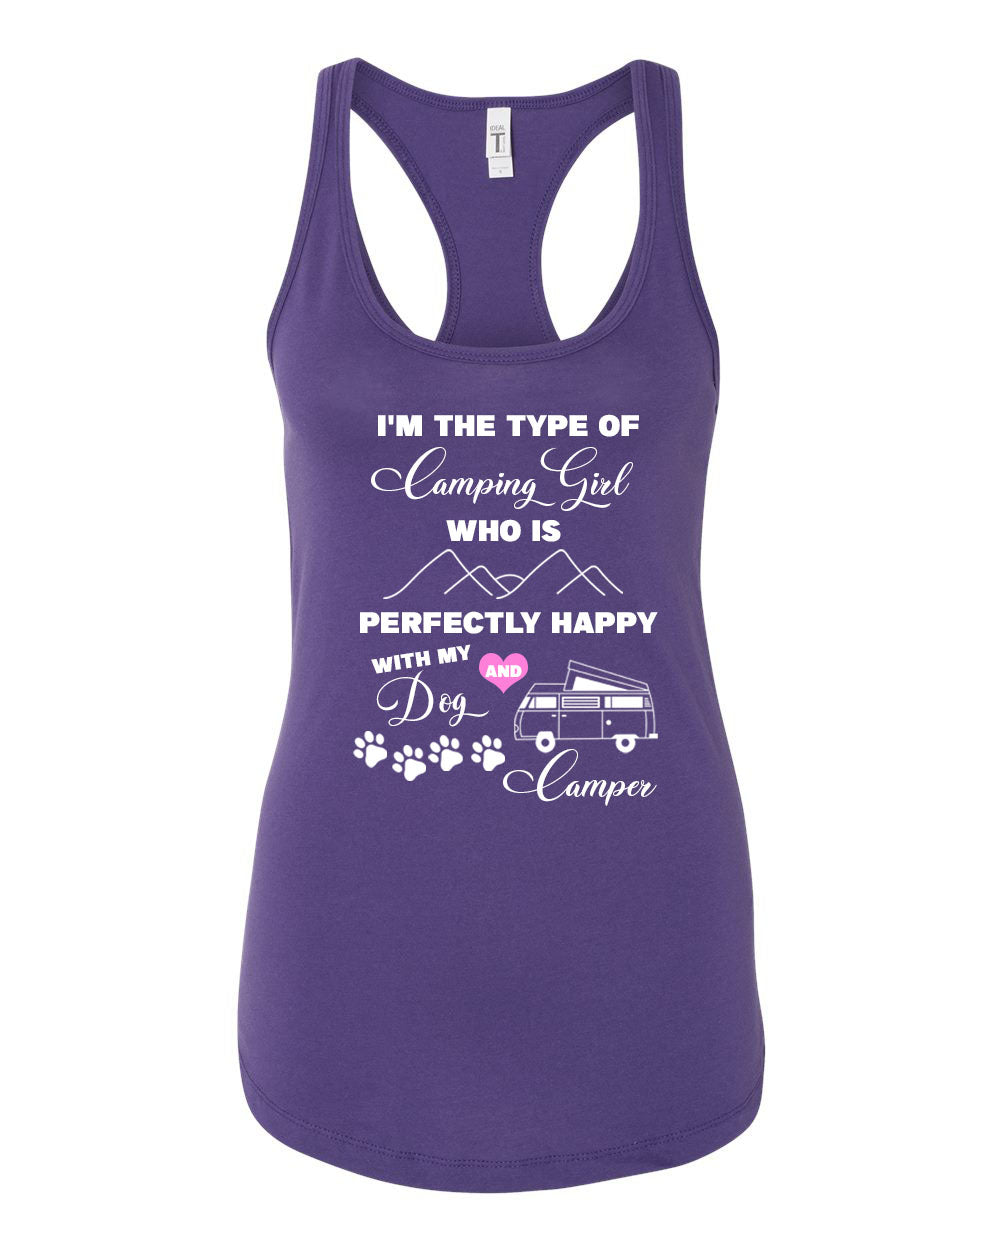 Camping and Dogs Tank Top